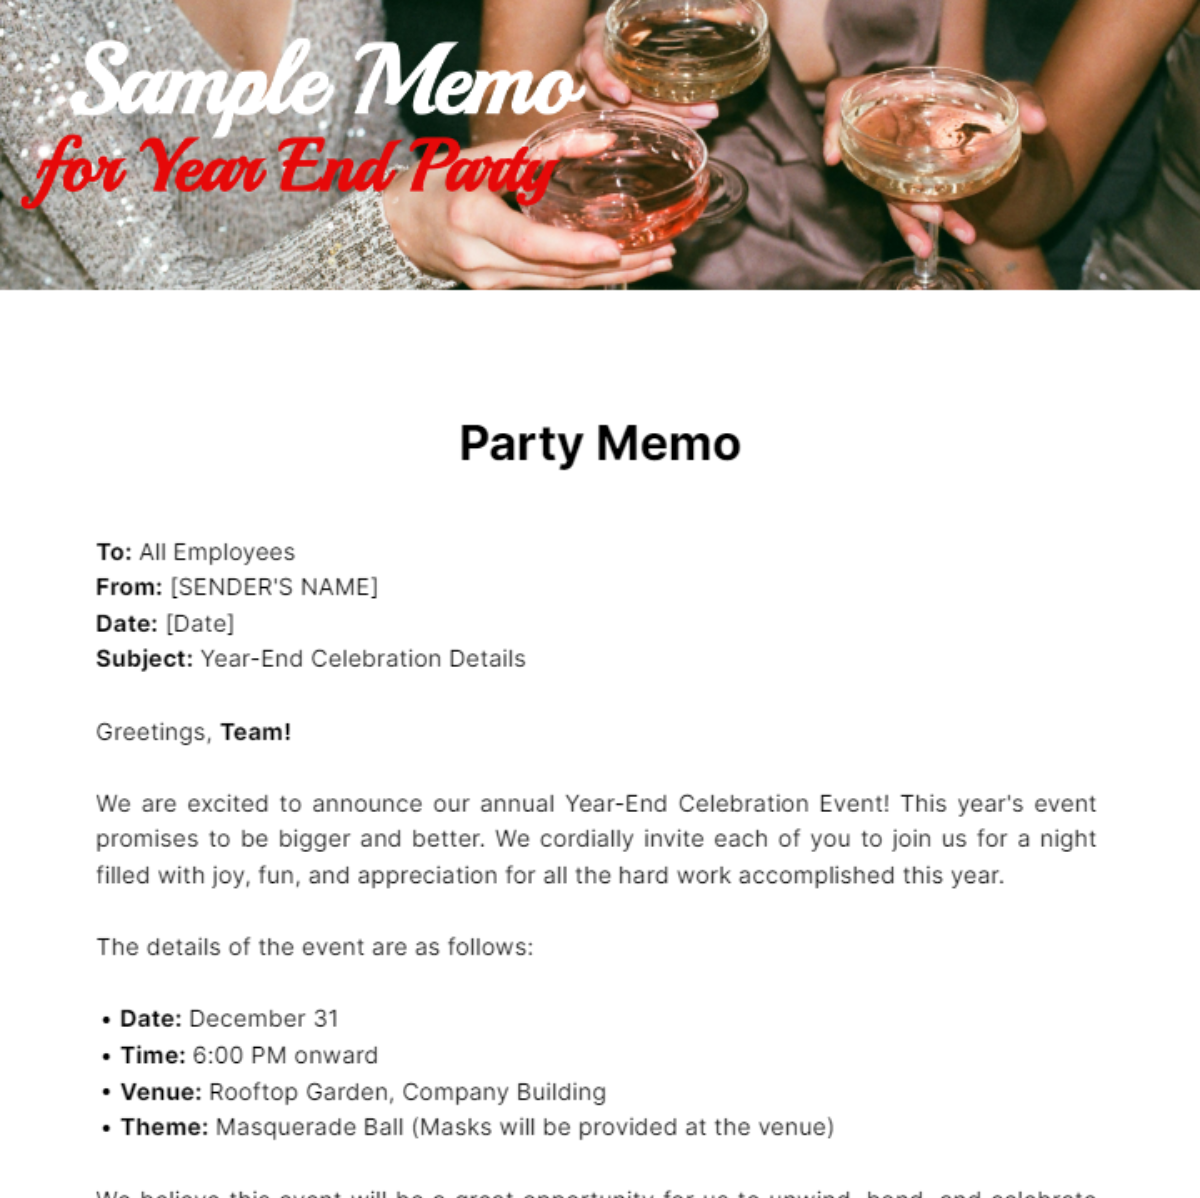 Sample Memo for Year End Party